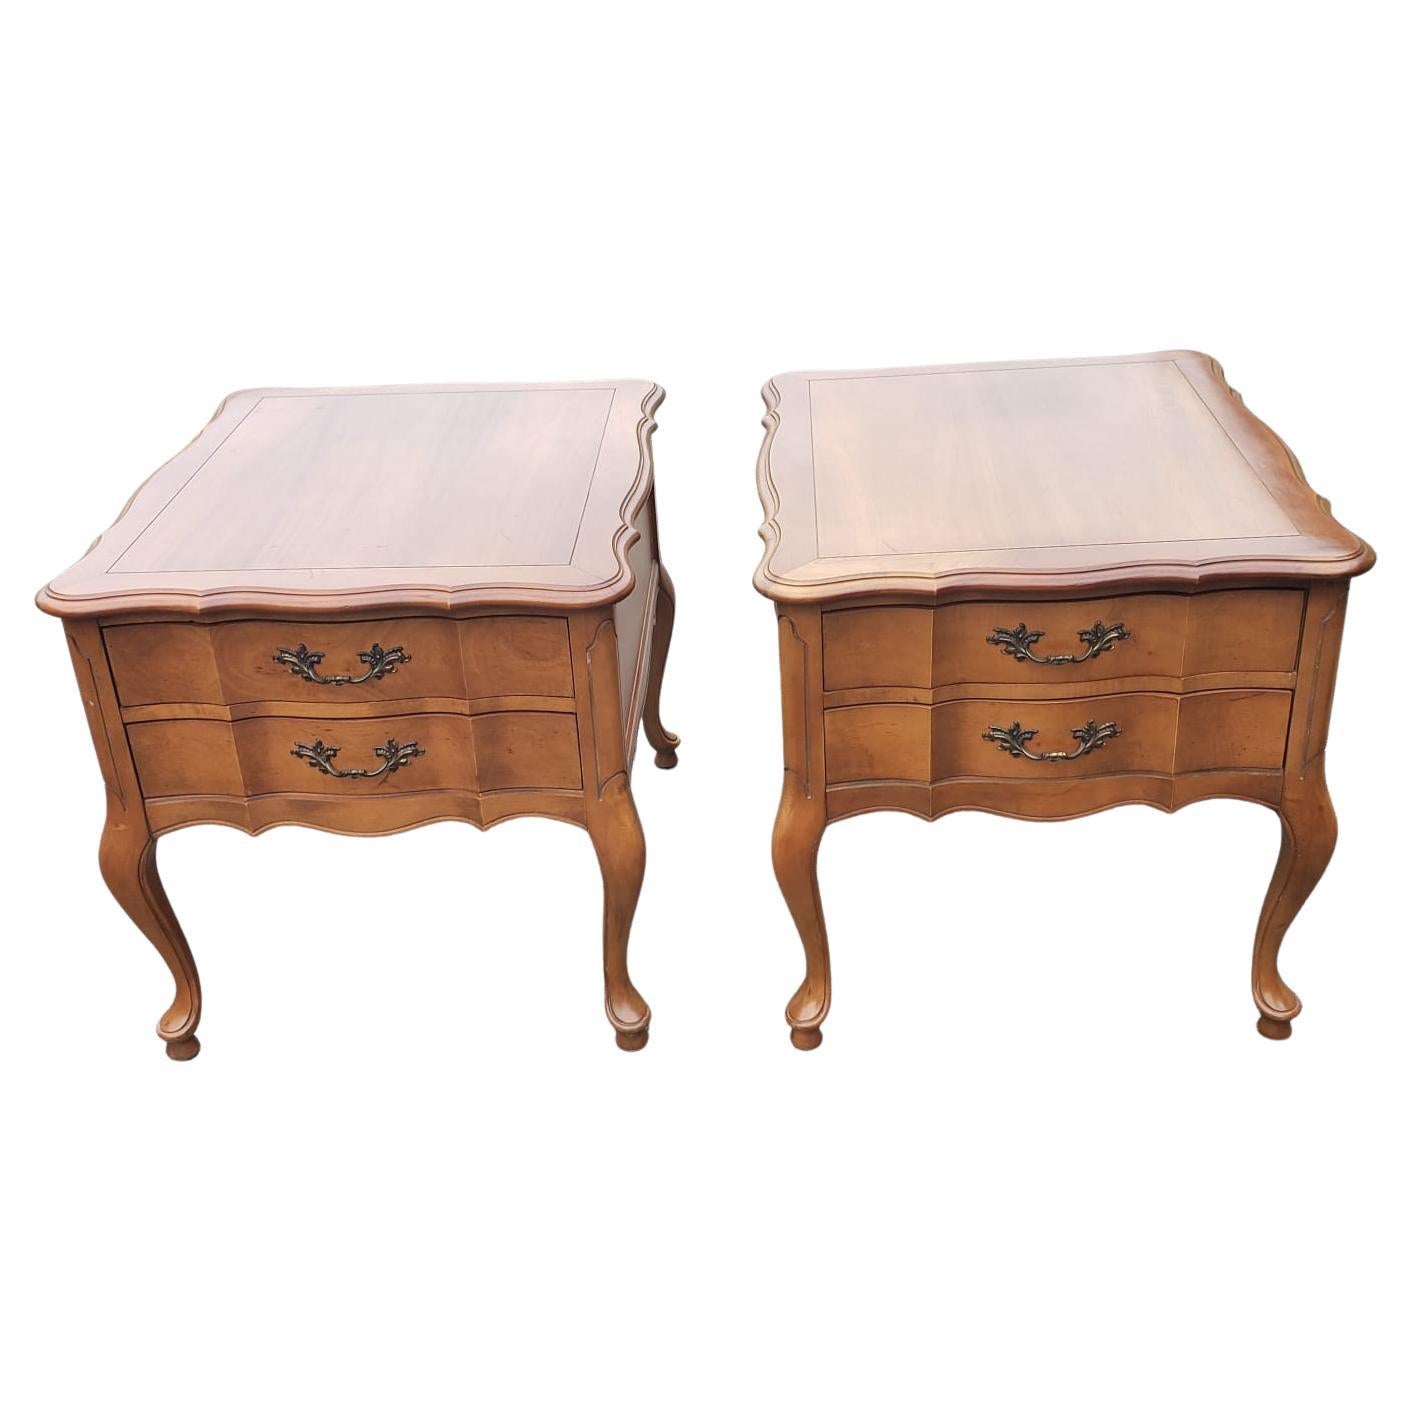 White furniture French country two-drawer maple side tables in good vintage condition.
Two roomy dovetailed drawers close and open smoothly. 
Measures 22